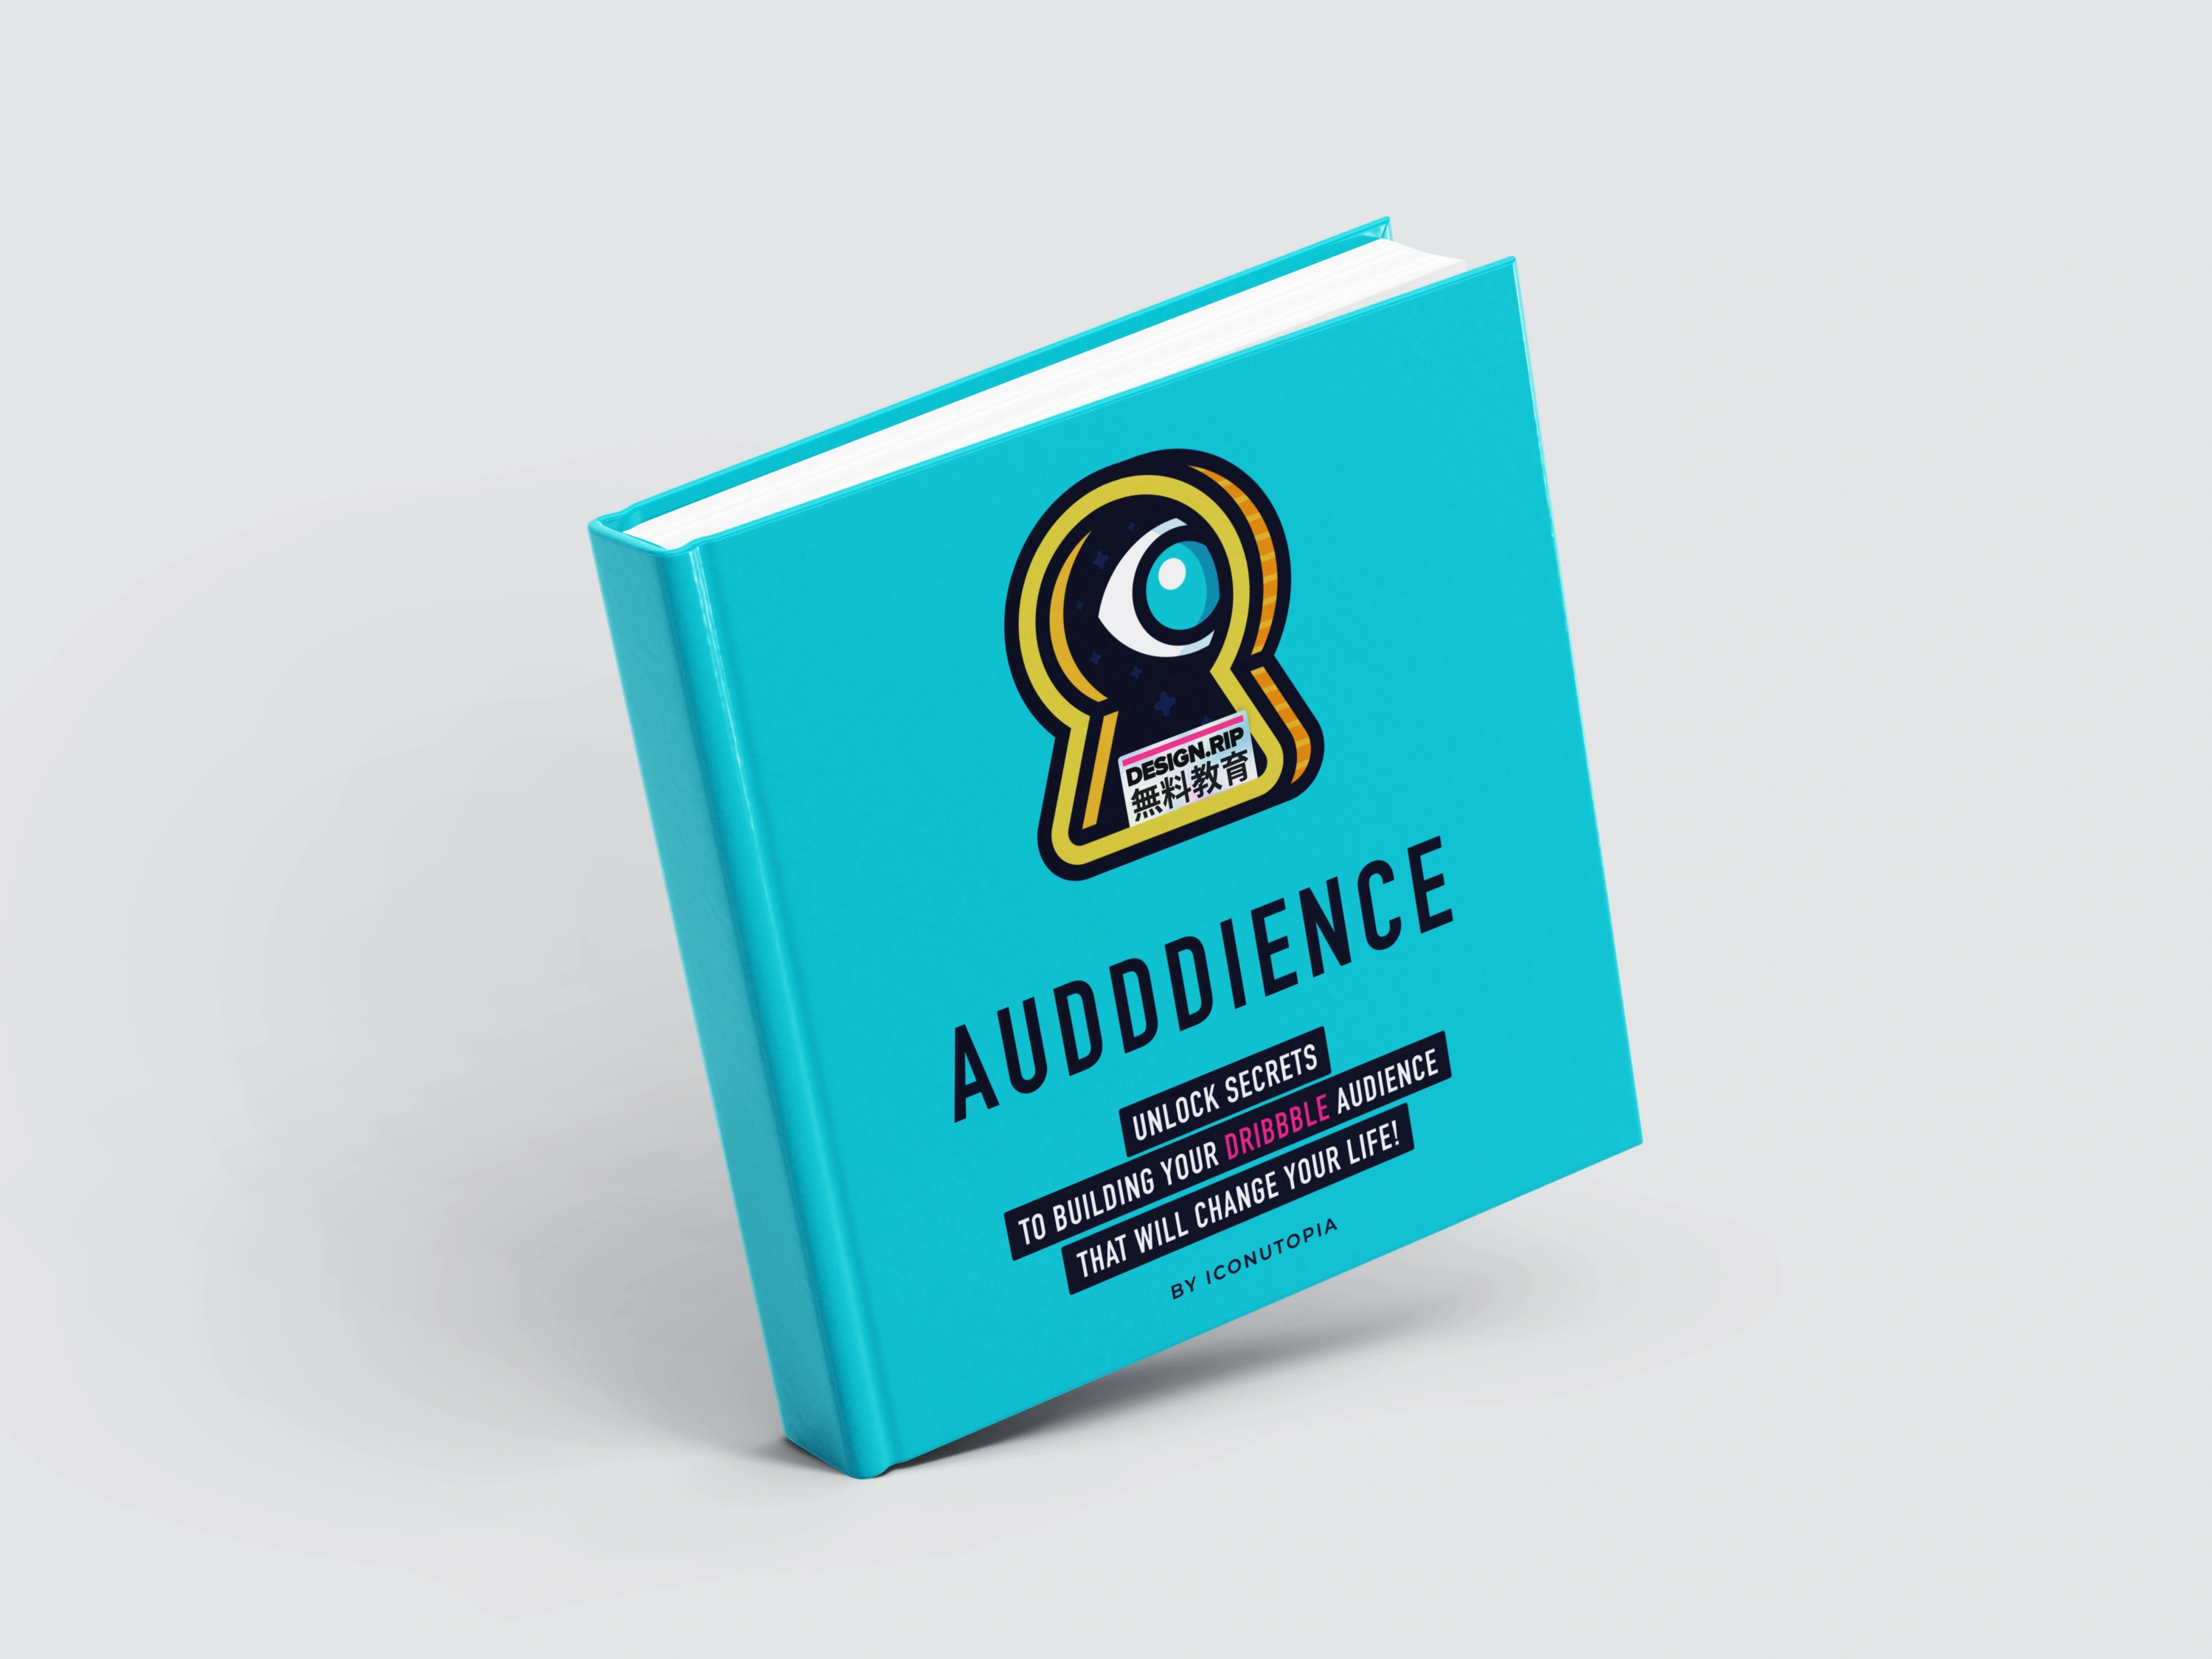 [VIP] Audddience: A Comprehensive Guide to Building your Dribbble following